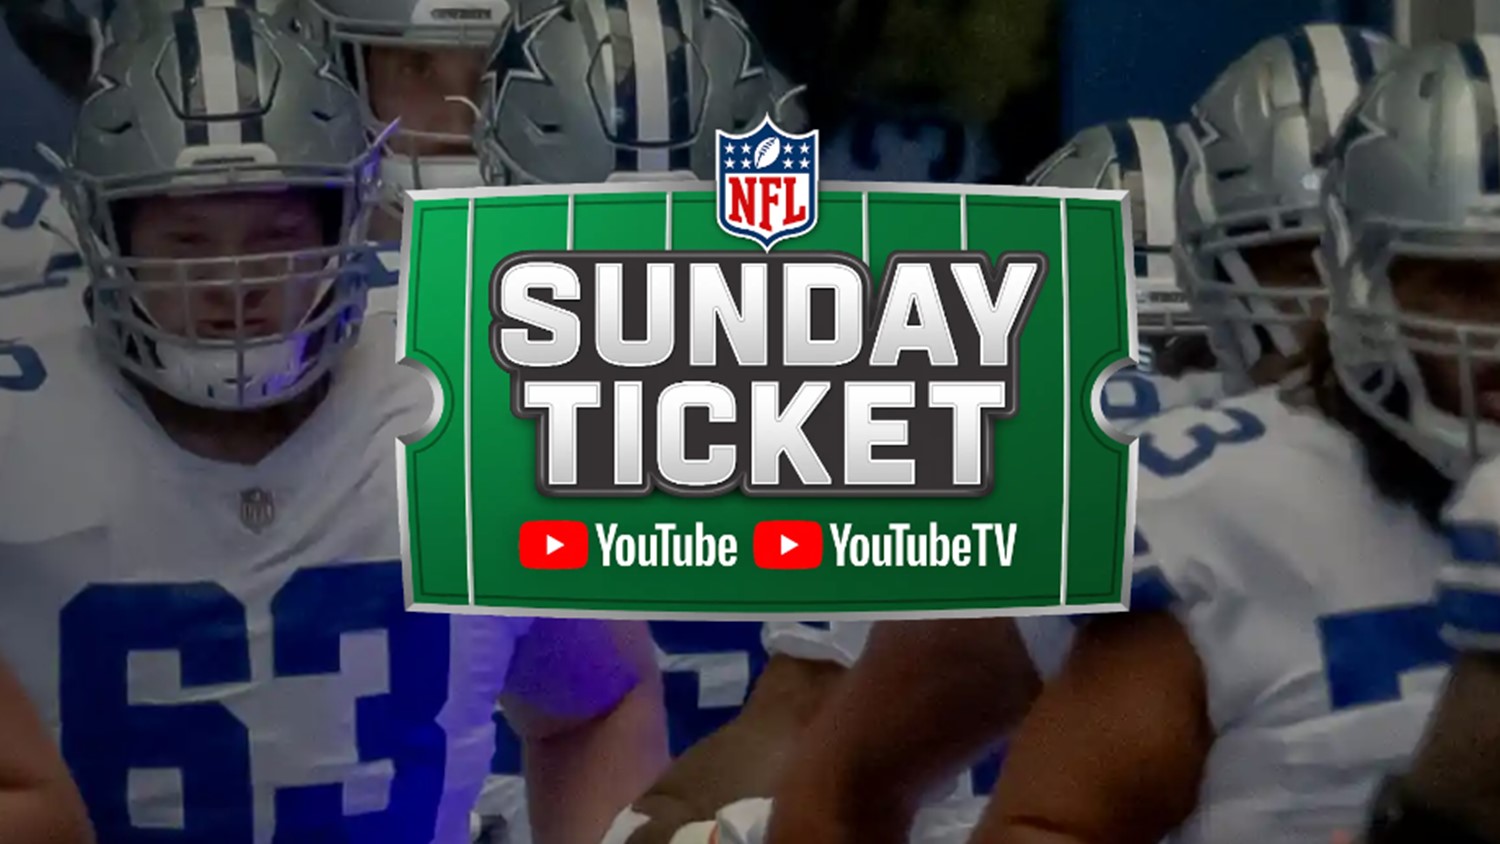 NFL Sunday Ticket: Deals, plans, and more - Android Authority